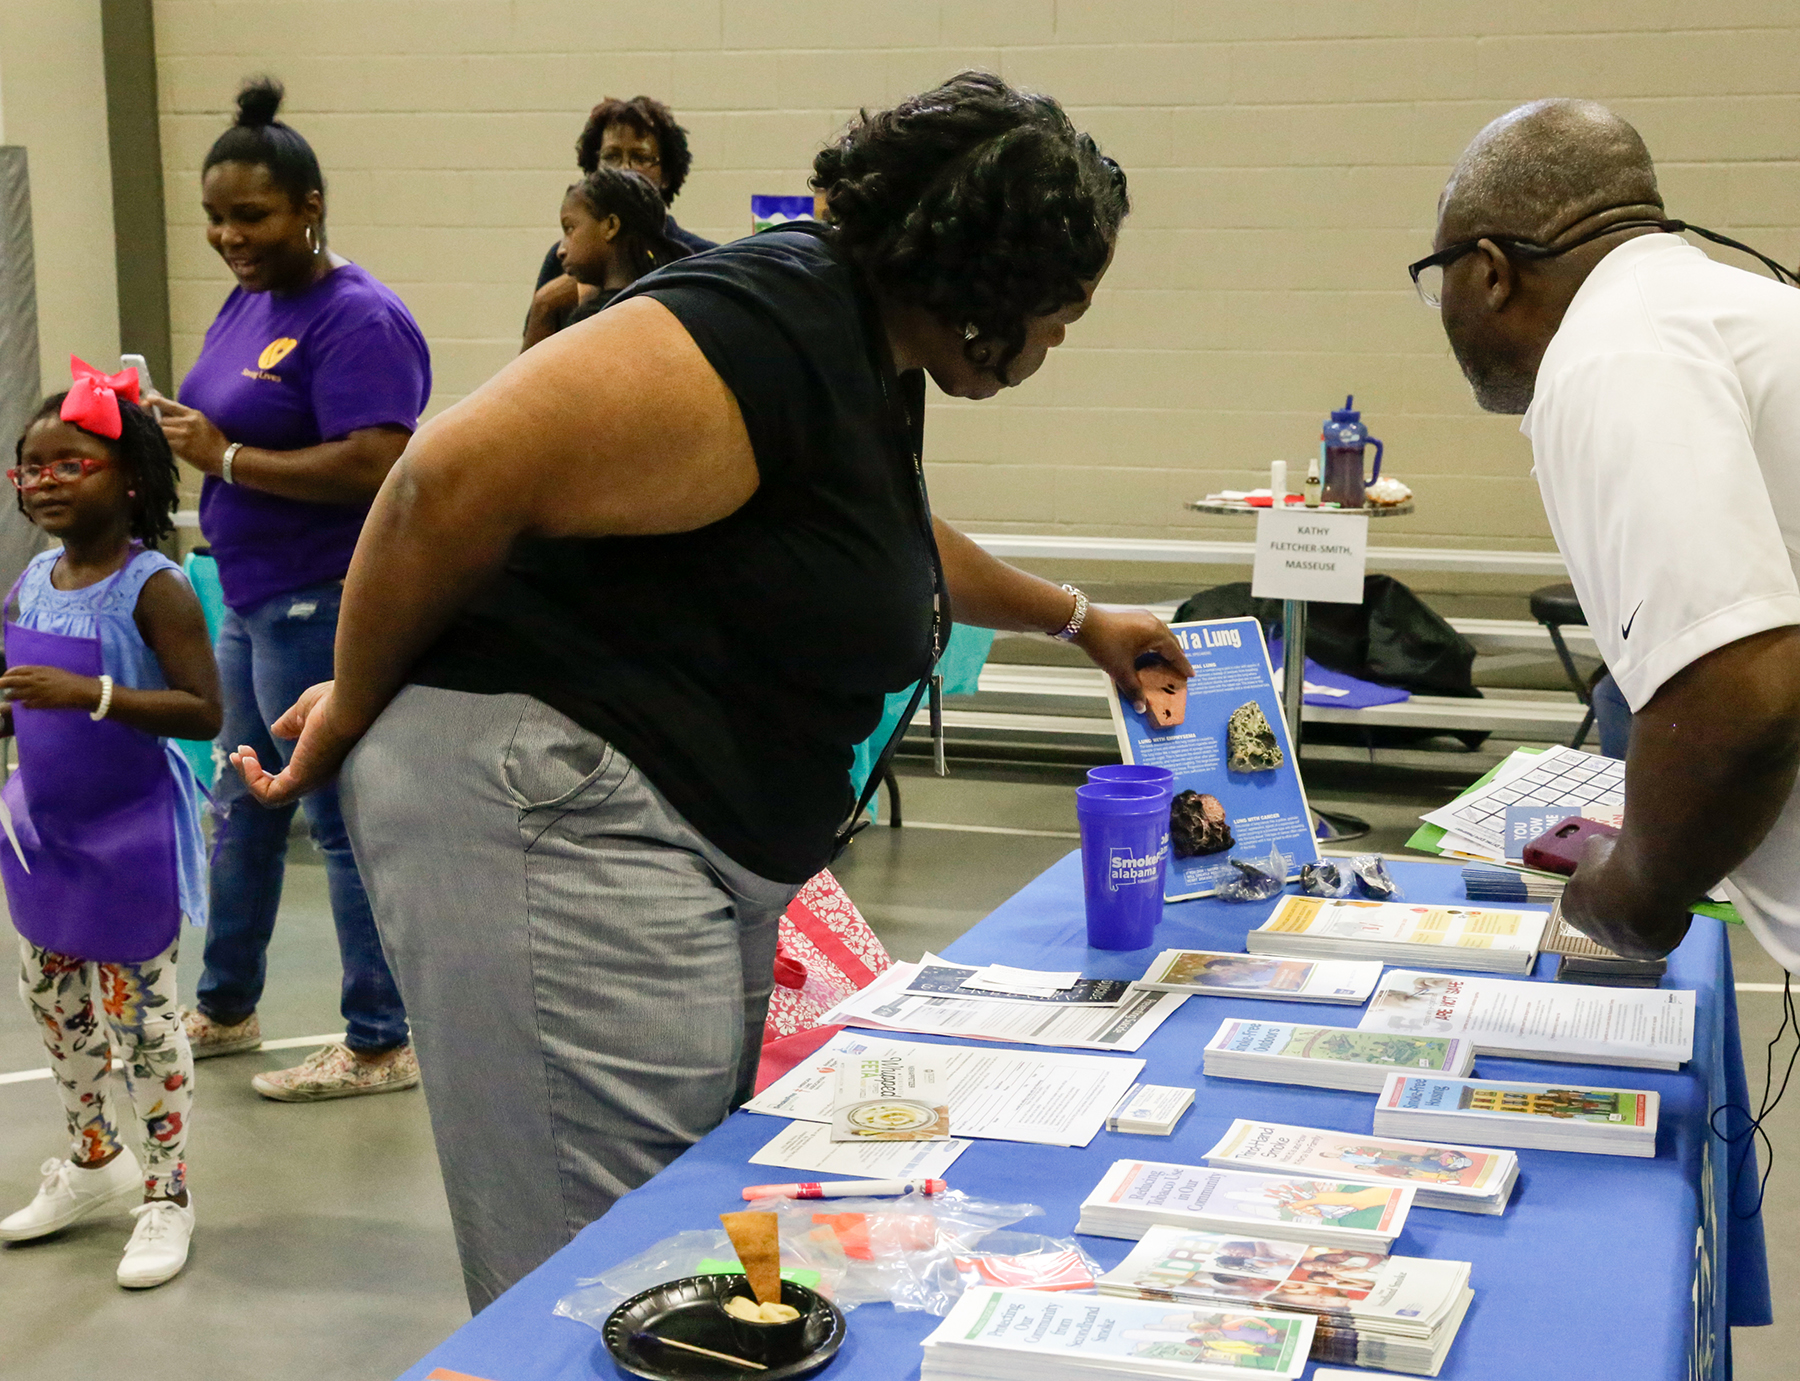 Fayetta Royal, a tobacco prevention and control coordinator with the Alabama Department of Public Health, explains a lung display.